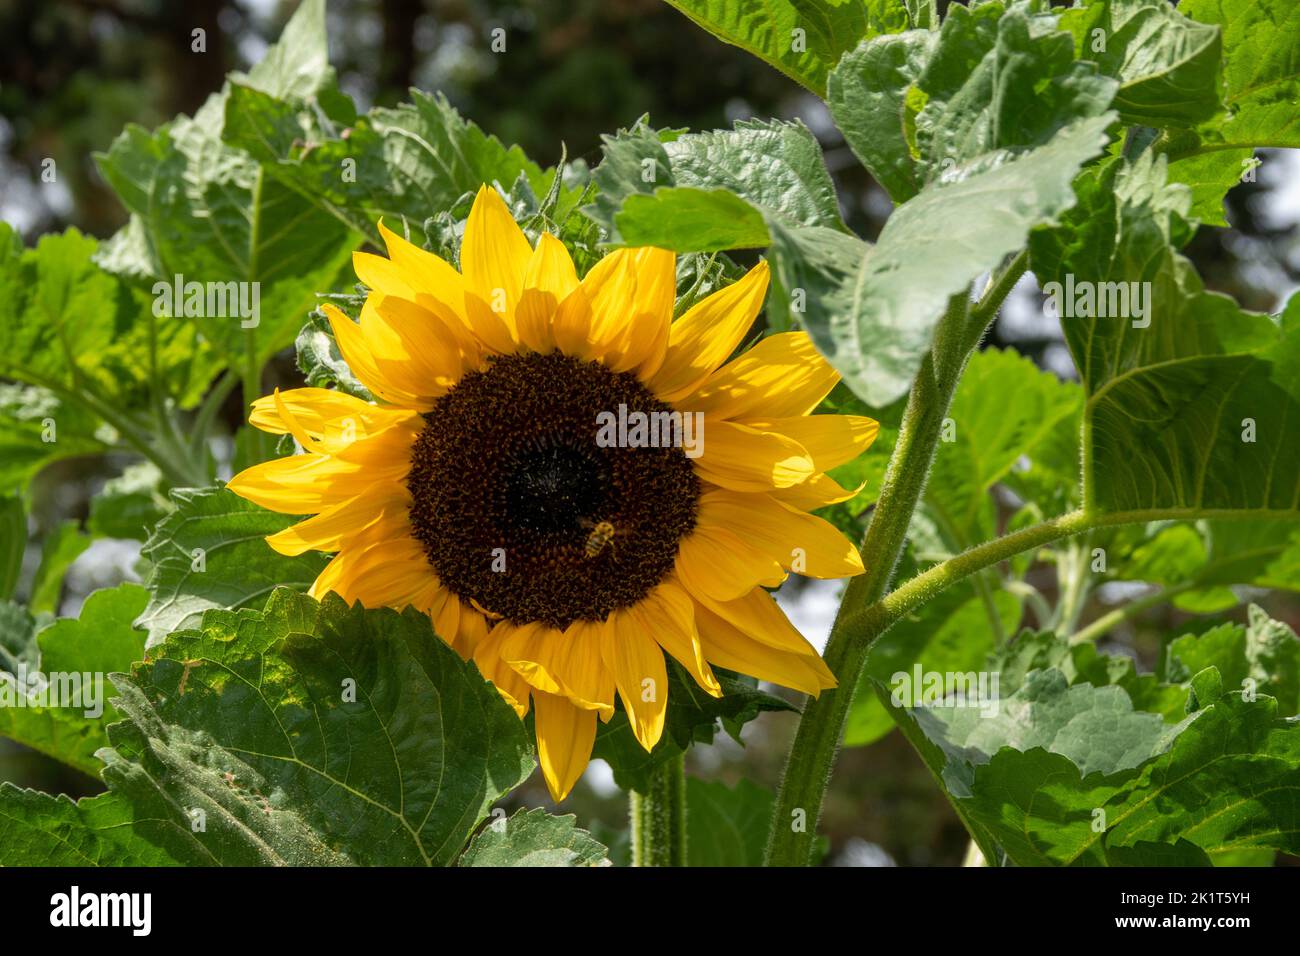 bumble bee collecting pollen from beautiful bright yellow sunflower Stock Photo